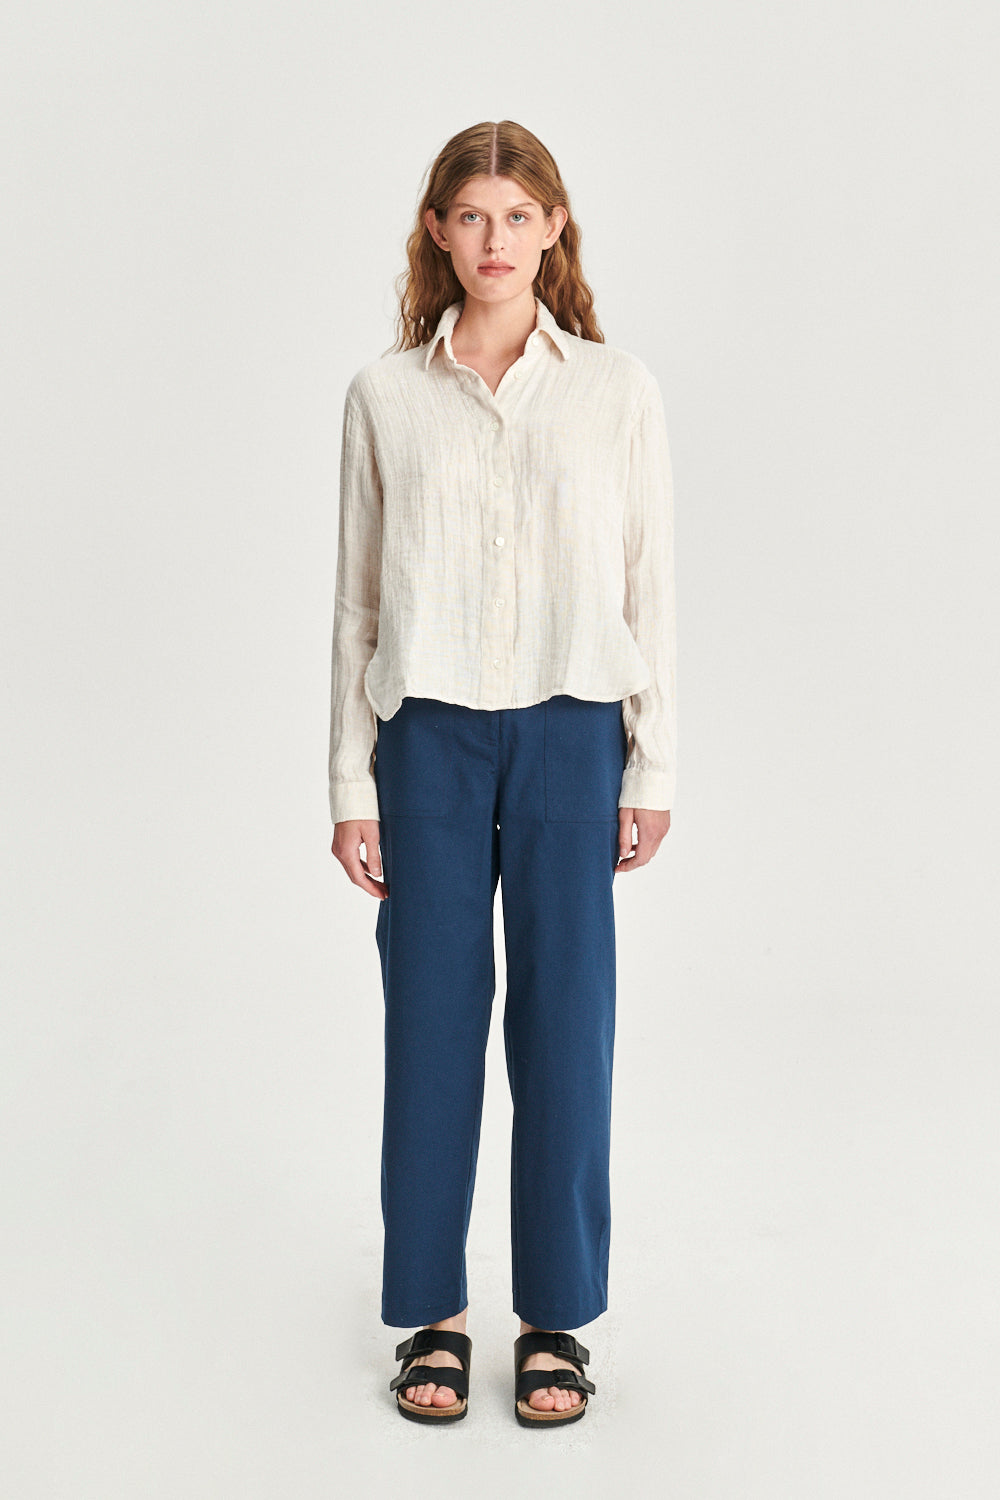 Relaxed Blouse in a Double Sided Off-White Fatigue Italian Linen and Cotton